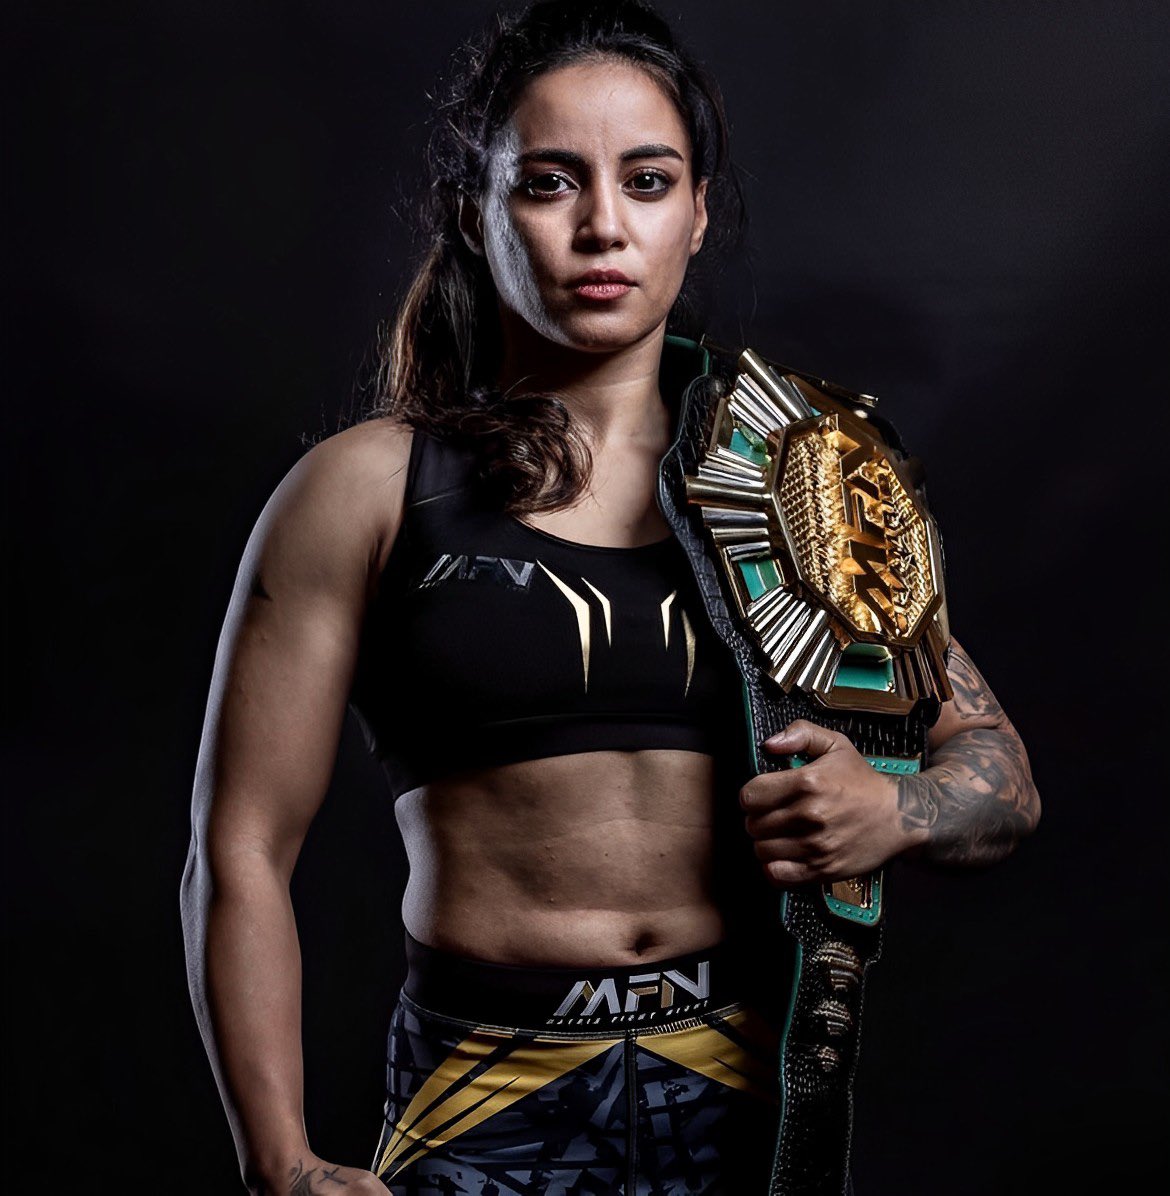 🚨 Making HISTORY! 🇮🇳 'The Cyclone' 𝐏𝐮𝐣𝐚 𝐓𝐨𝐦𝐚𝐫 has officially joined the UFC. This talented strawweight, a regional champion, proudly becomes the FIRST Indian woman to ink a deal with the UFC. Let's cheer for her success! 🥋👏 #WMMA #UFC